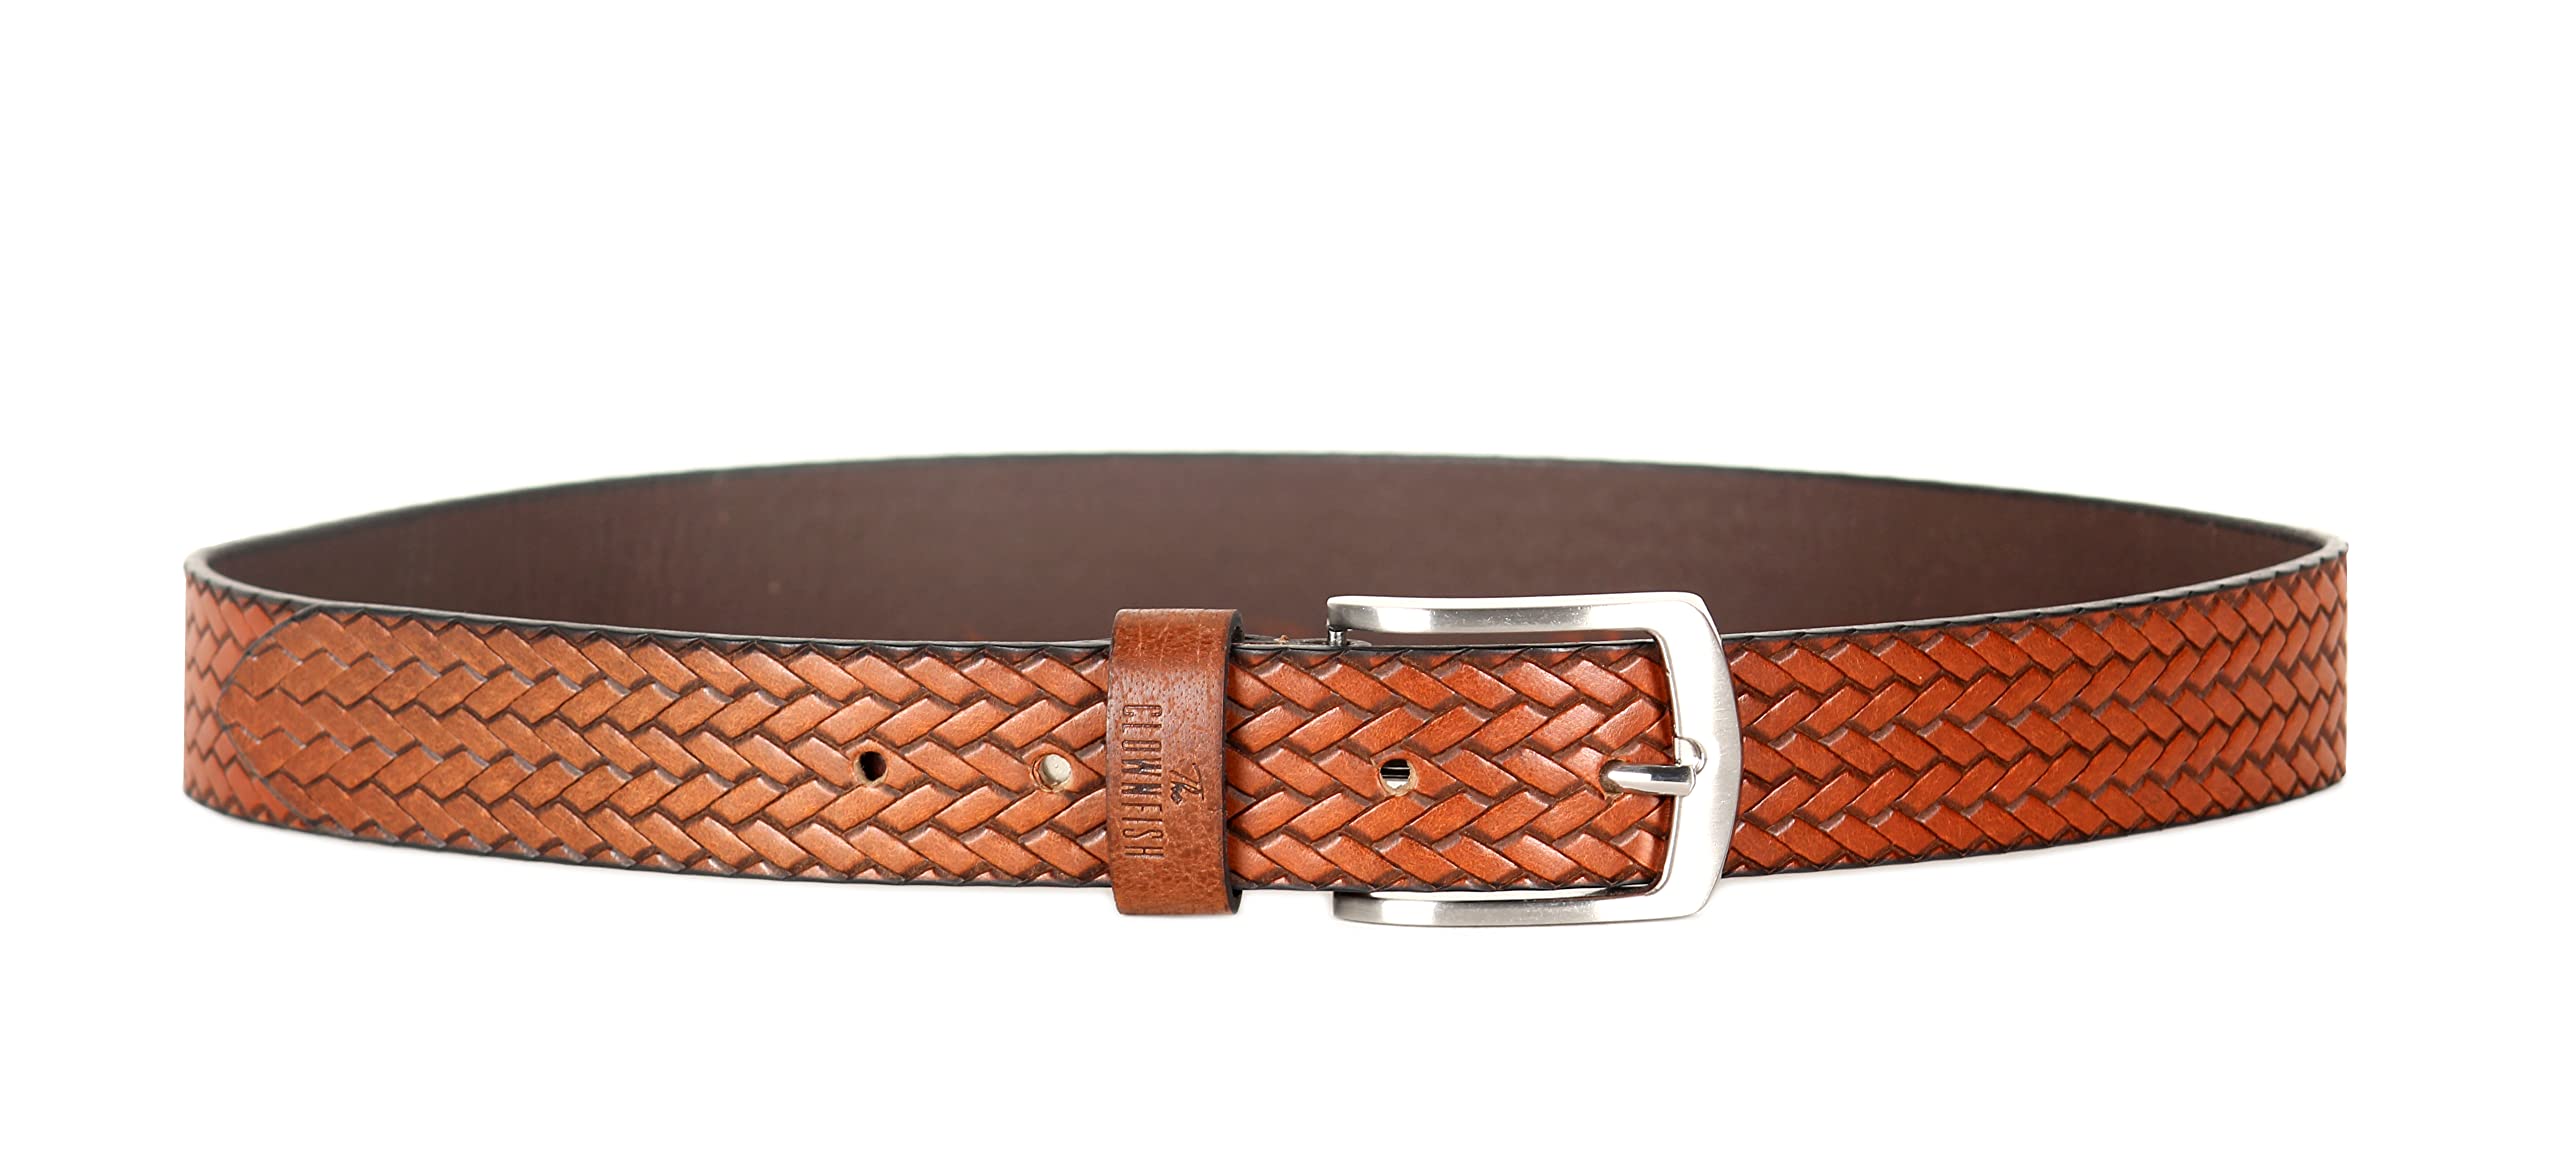 THE CLOWNFISH Men's Genuine Leather Belt with Textured/Embossed Design-Copper Brown (Size-32 inches)